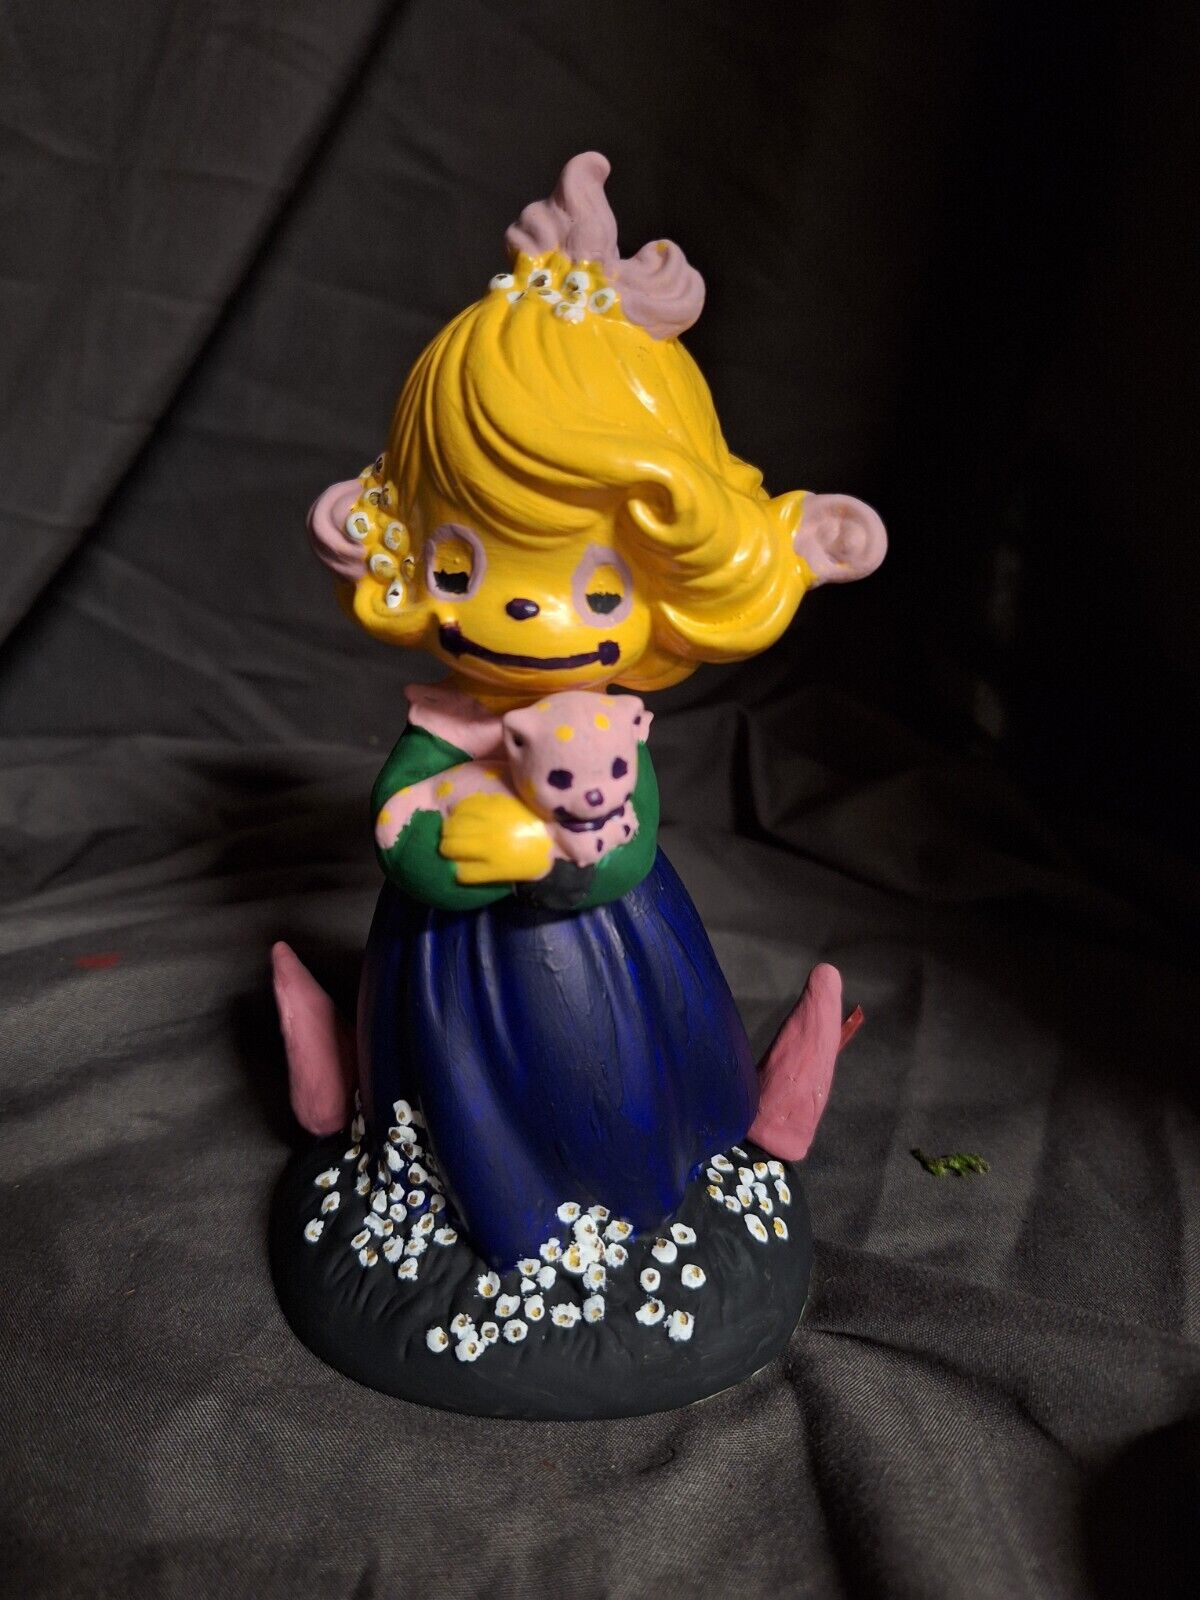 altered precious moments figurine Inspired By Killer Clowns From Outter Space...